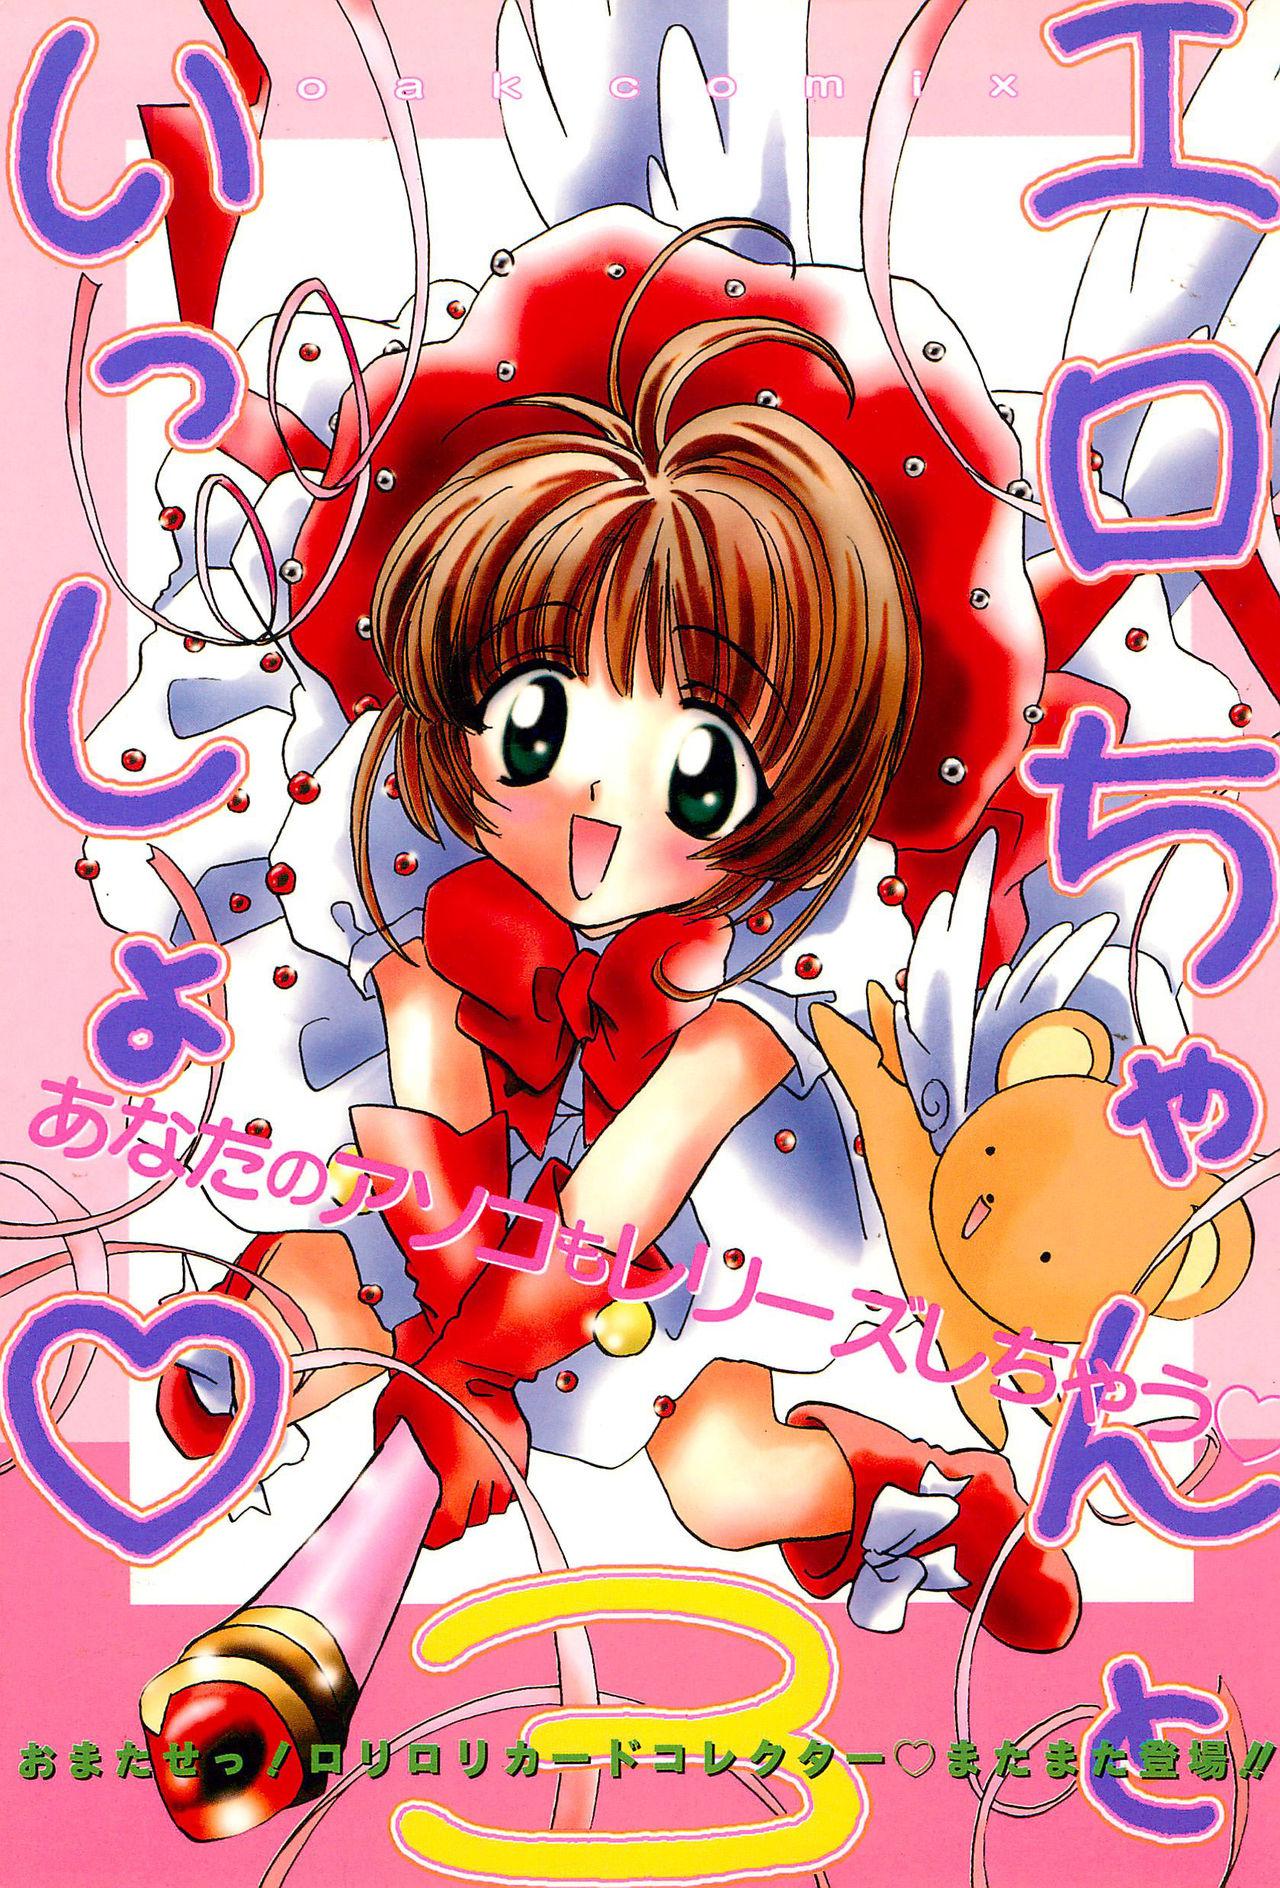 Condom Ero-chan to Issho 3 Bishoujo Card Collector H Anthology - Cardcaptor sakura Gay Orgy - Picture 1